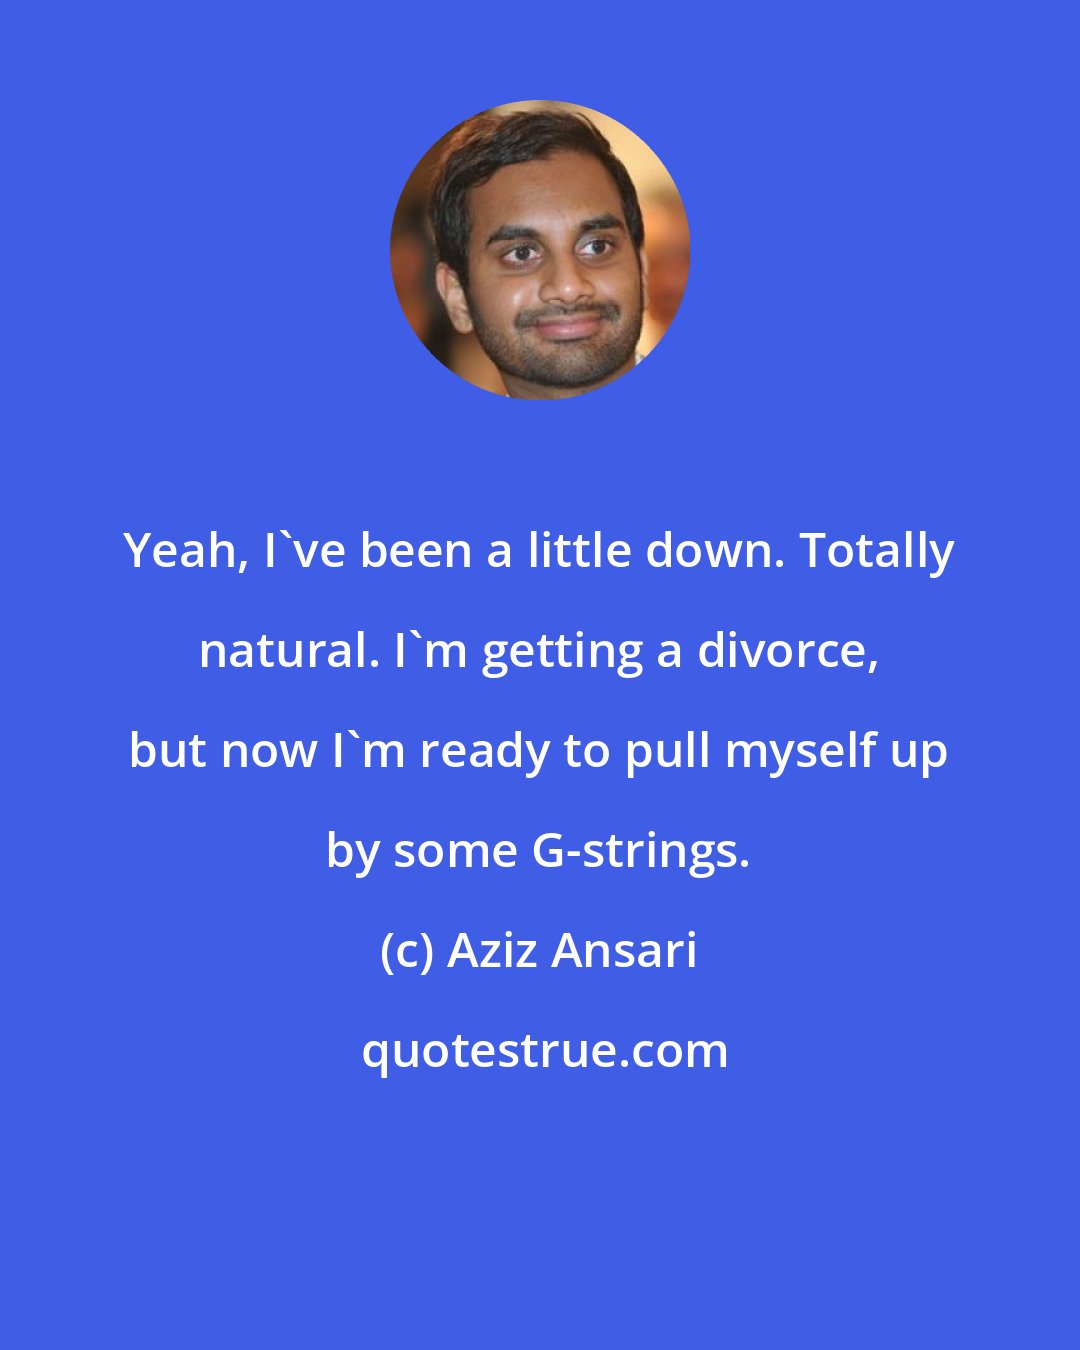 Aziz Ansari: Yeah, I've been a little down. Totally natural. I'm getting a divorce, but now I'm ready to pull myself up by some G-strings.